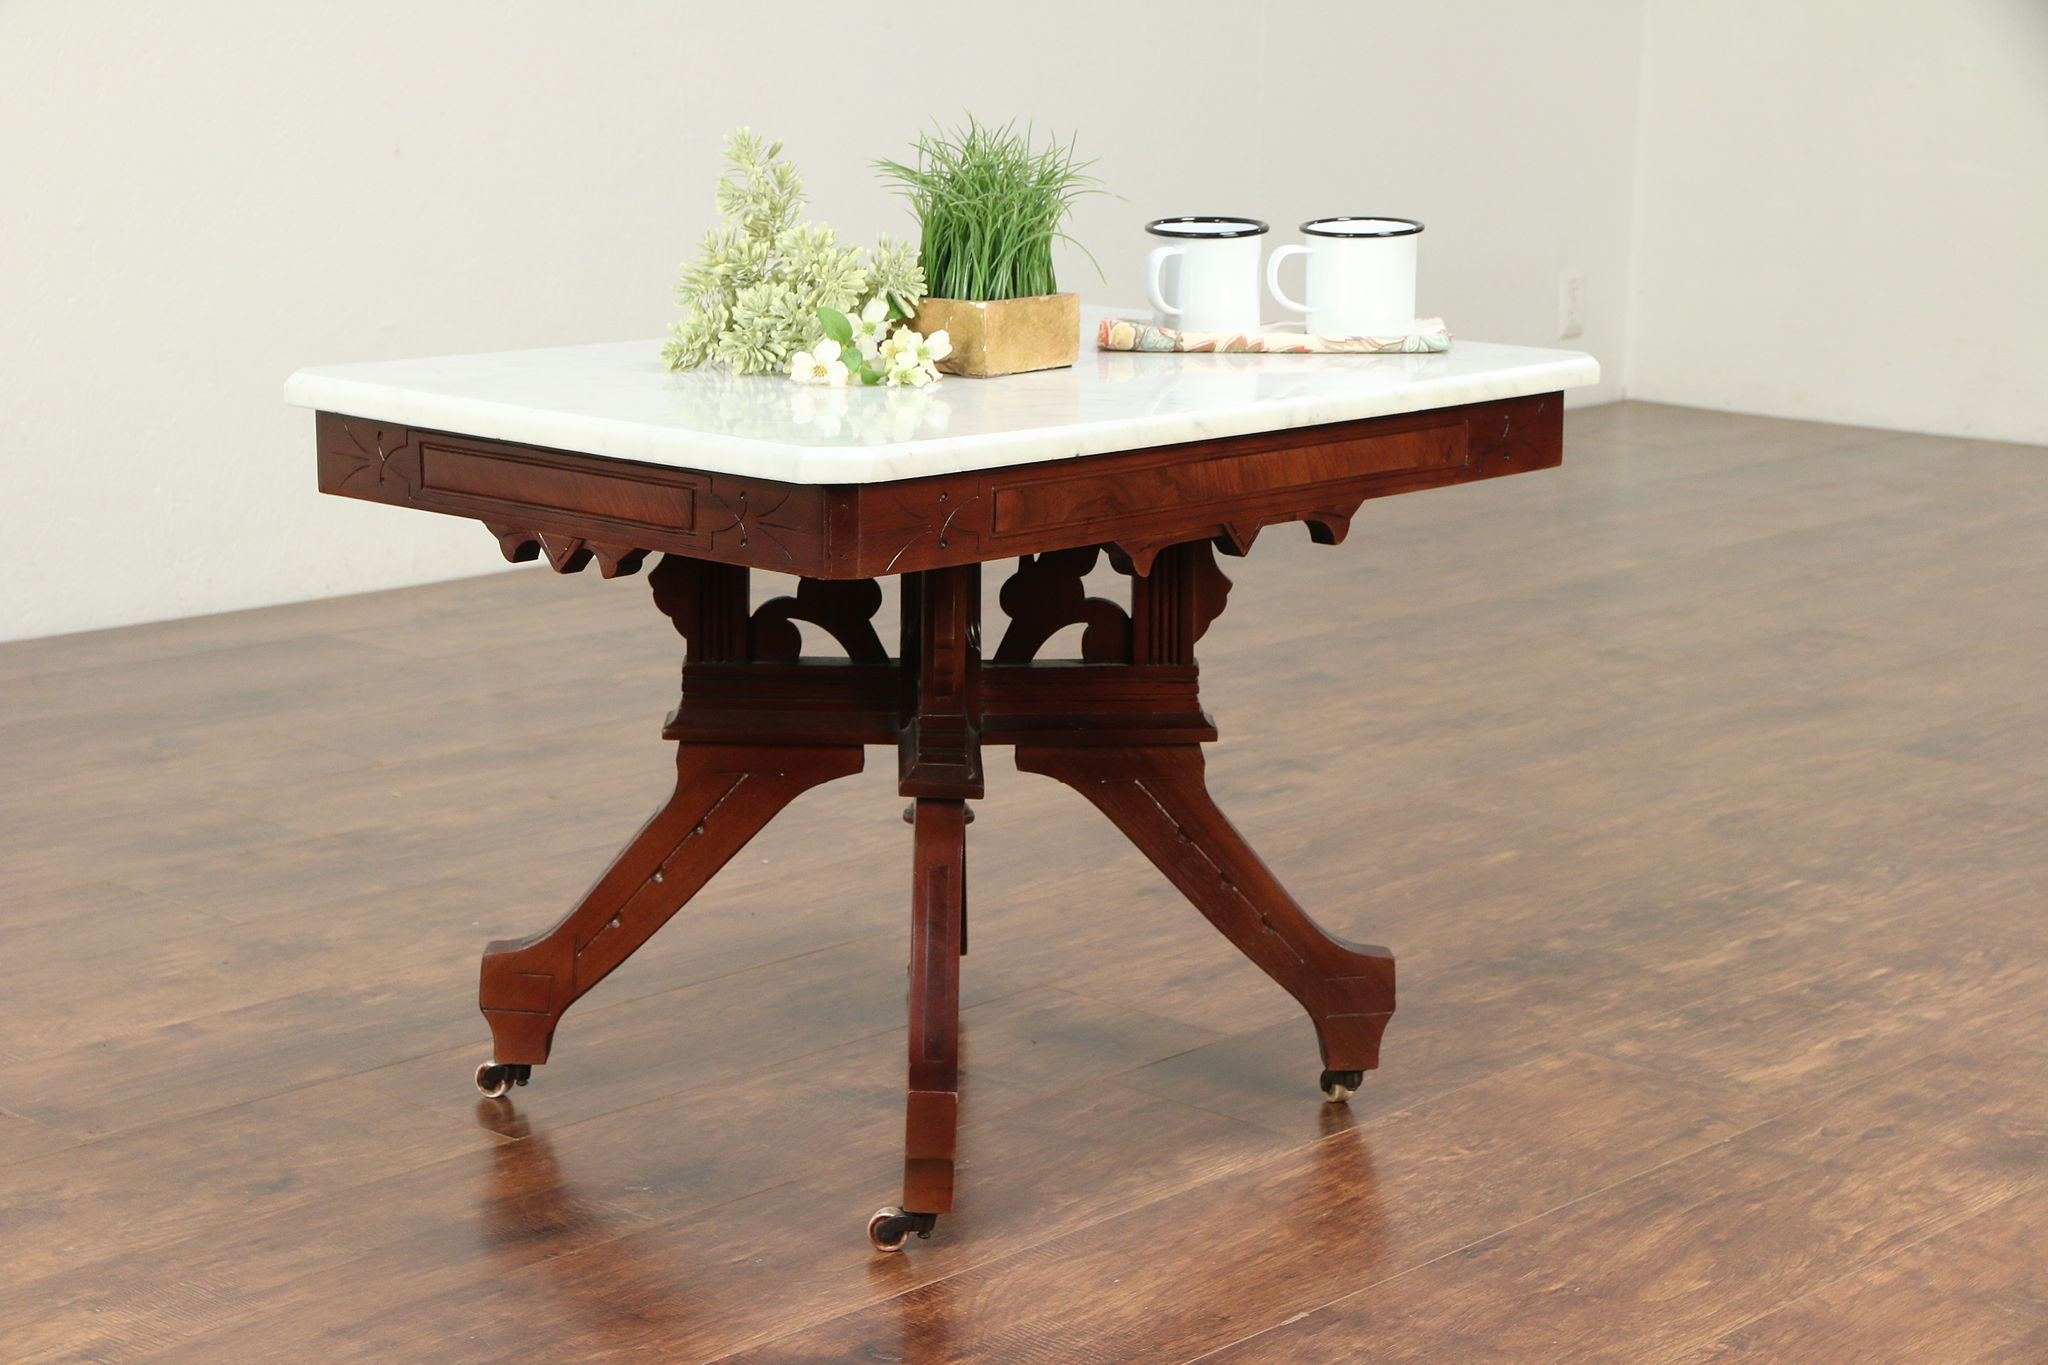 Sold Victorian Eastlake Antique Walnut Marble Top Coffee Table 29312 Harp Gallery Antiques Furniture,Haworthia Succulent